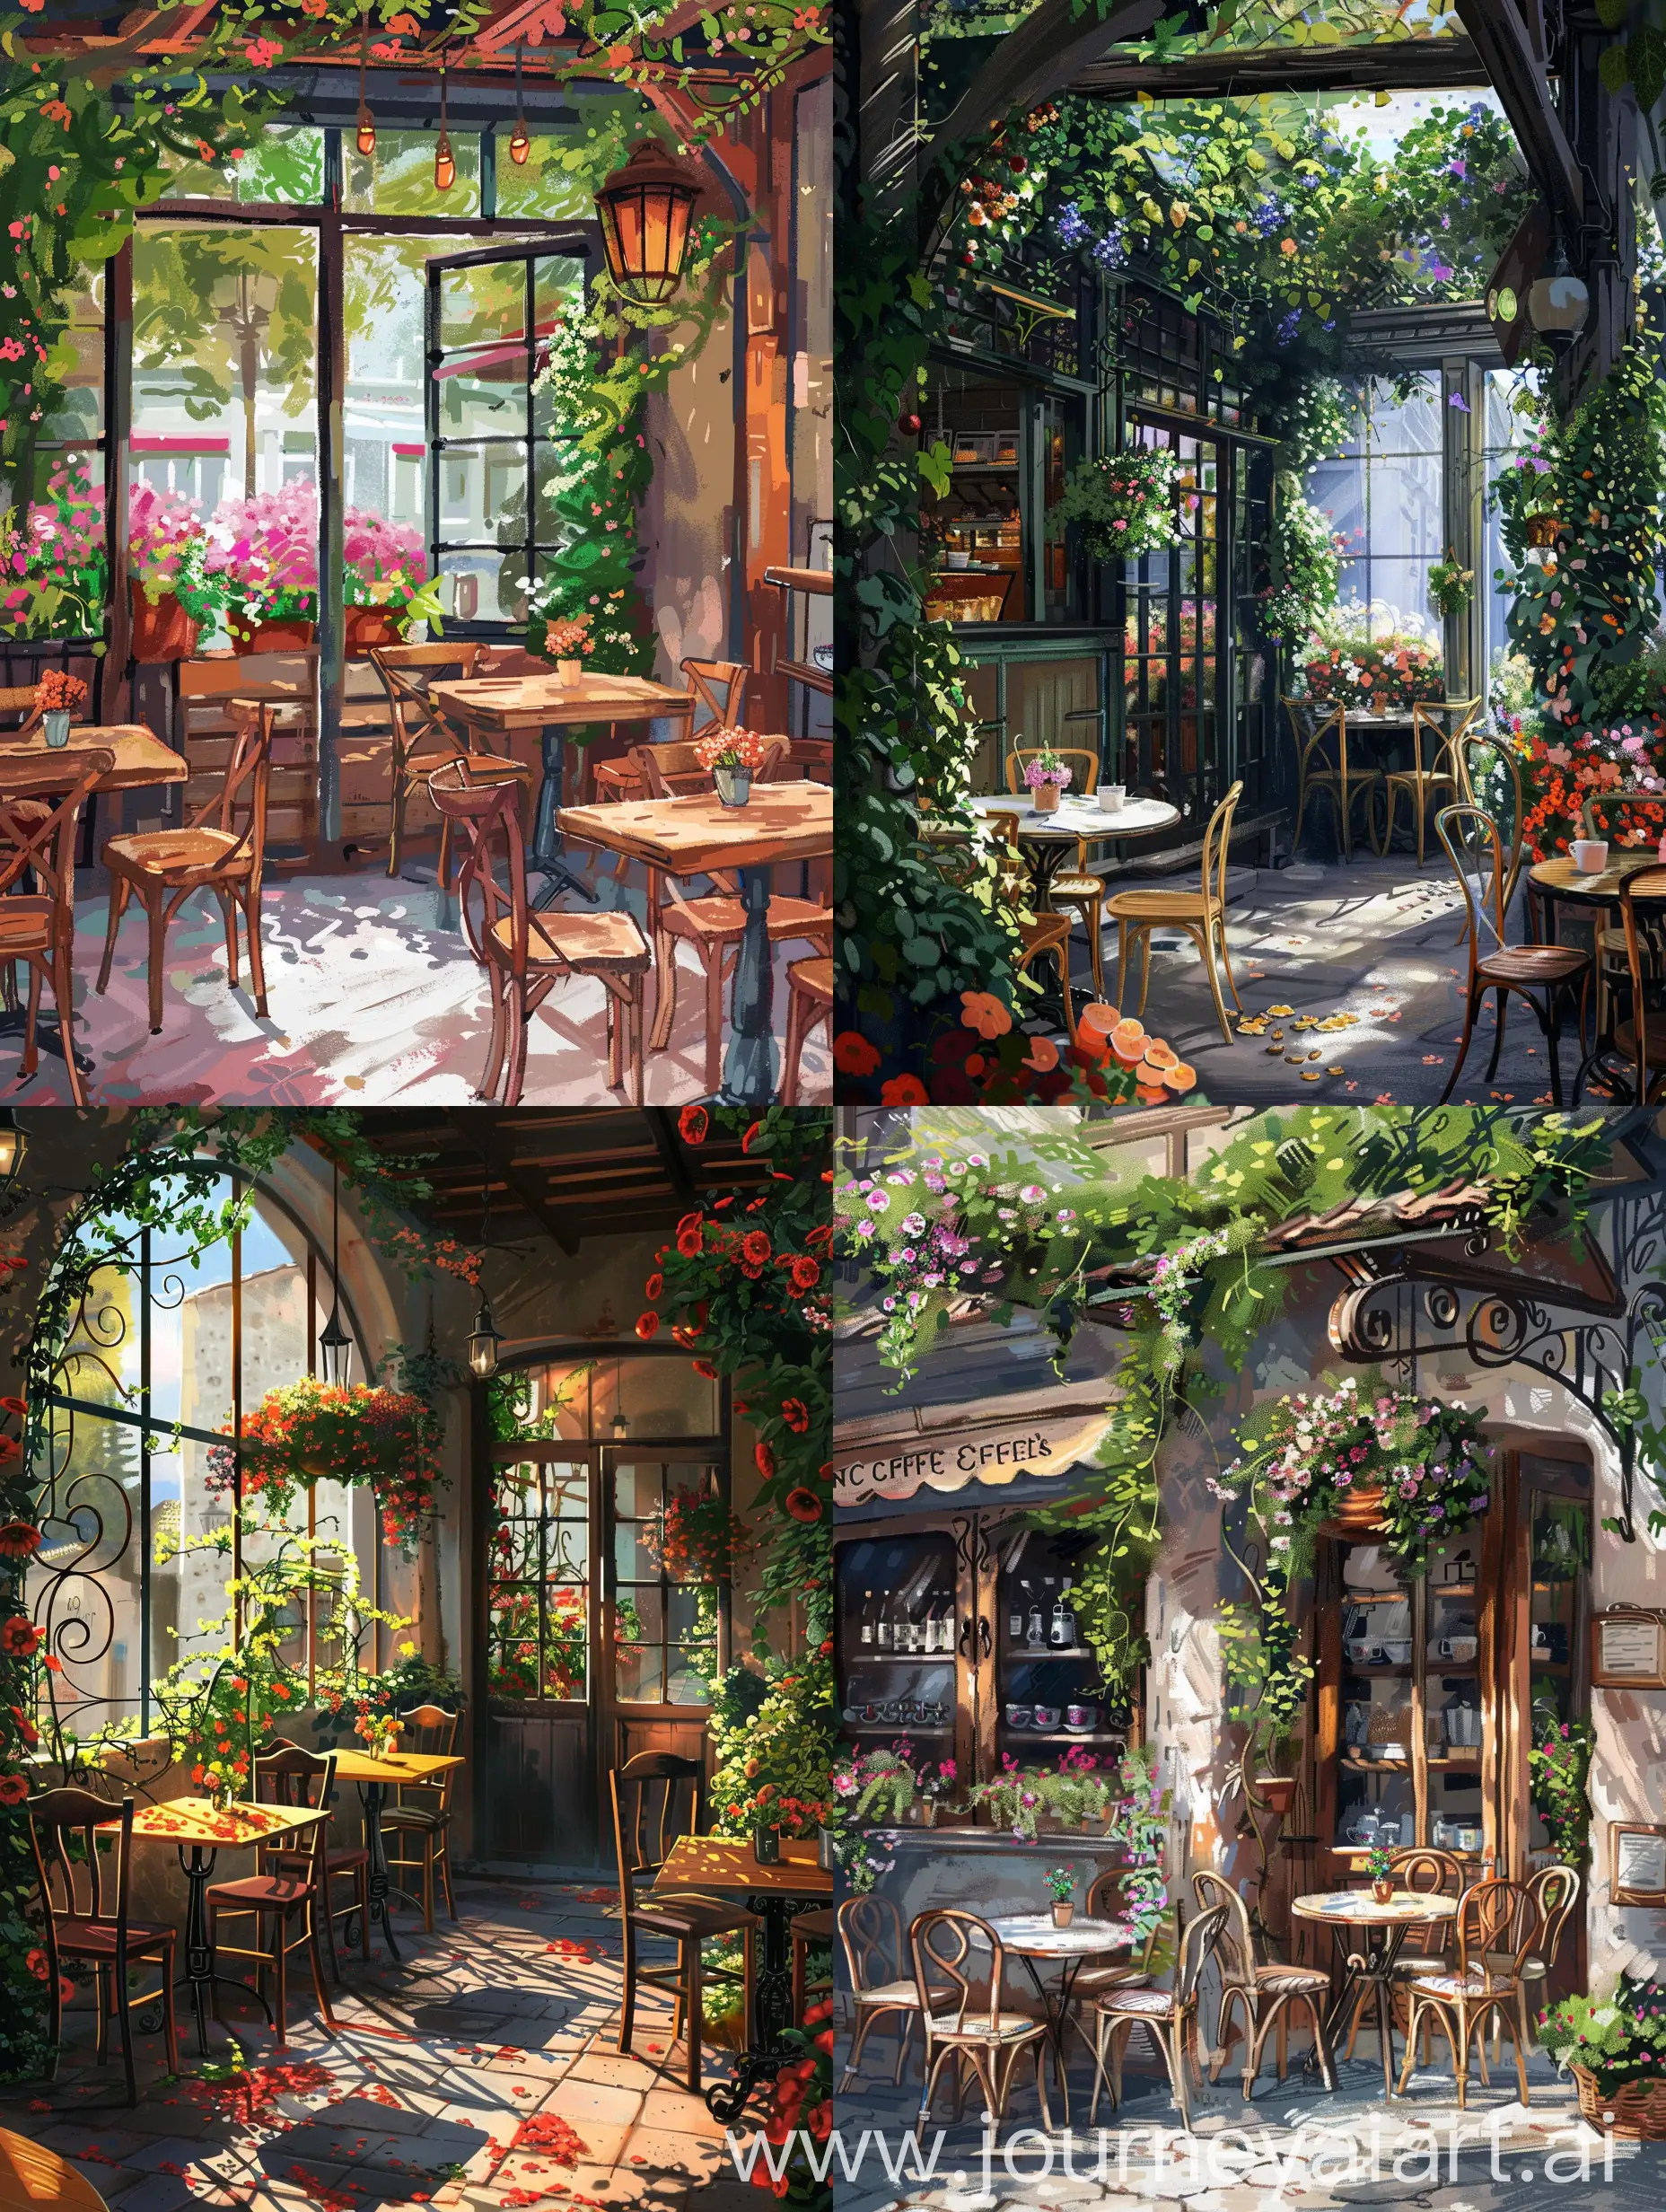 Digital painting of a coffee shop,outside view, tables flowers,vines